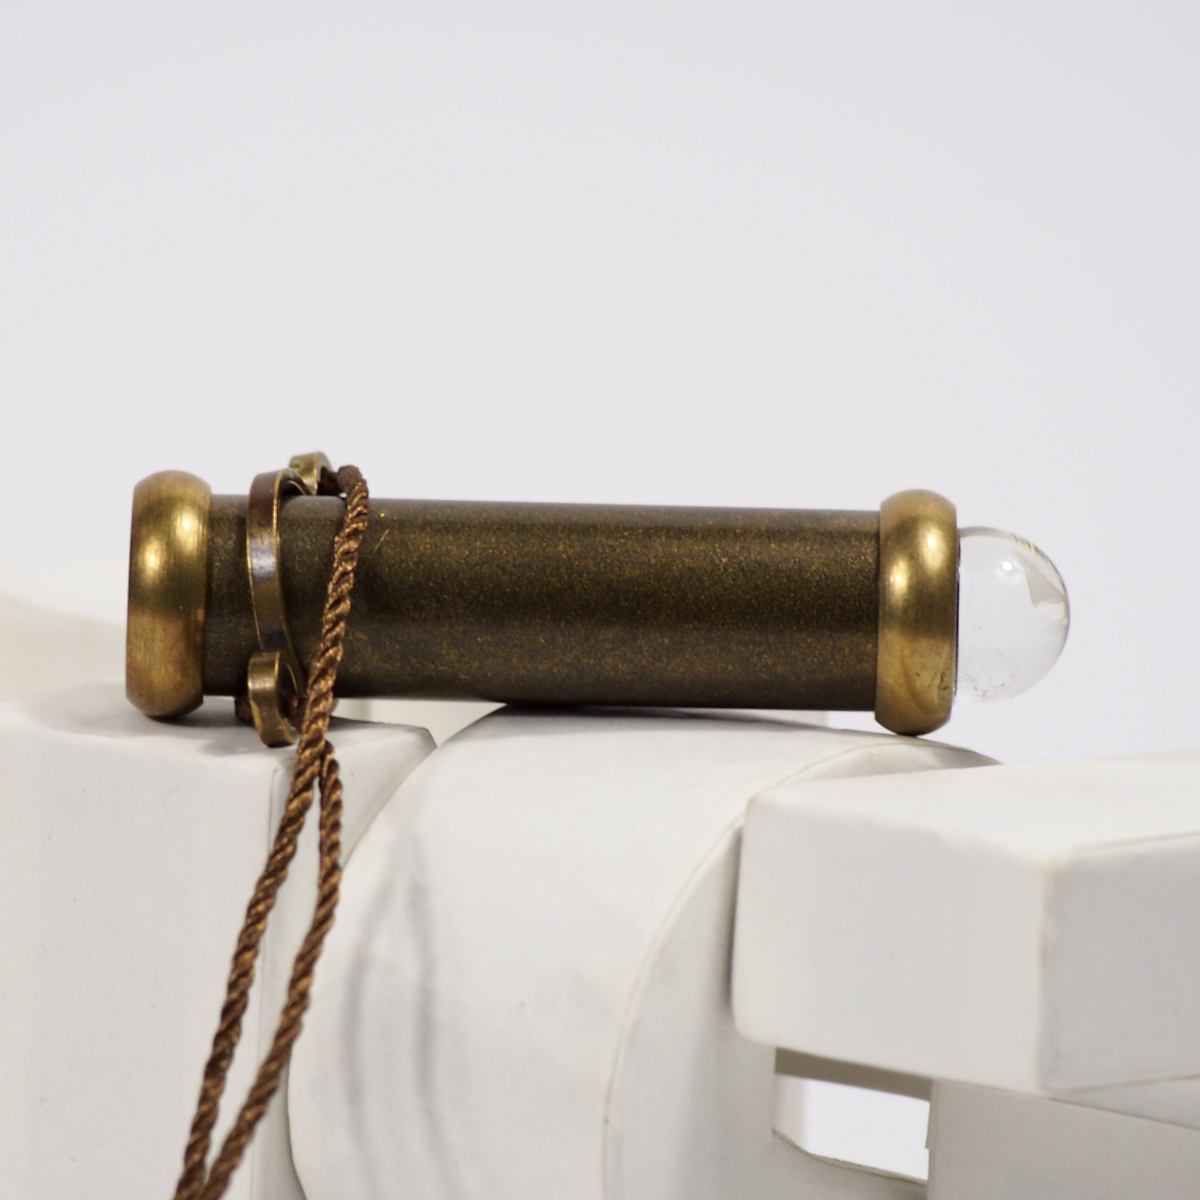 Mini Tele – Small Kaleidoscope made of Brass with Carrying Cord